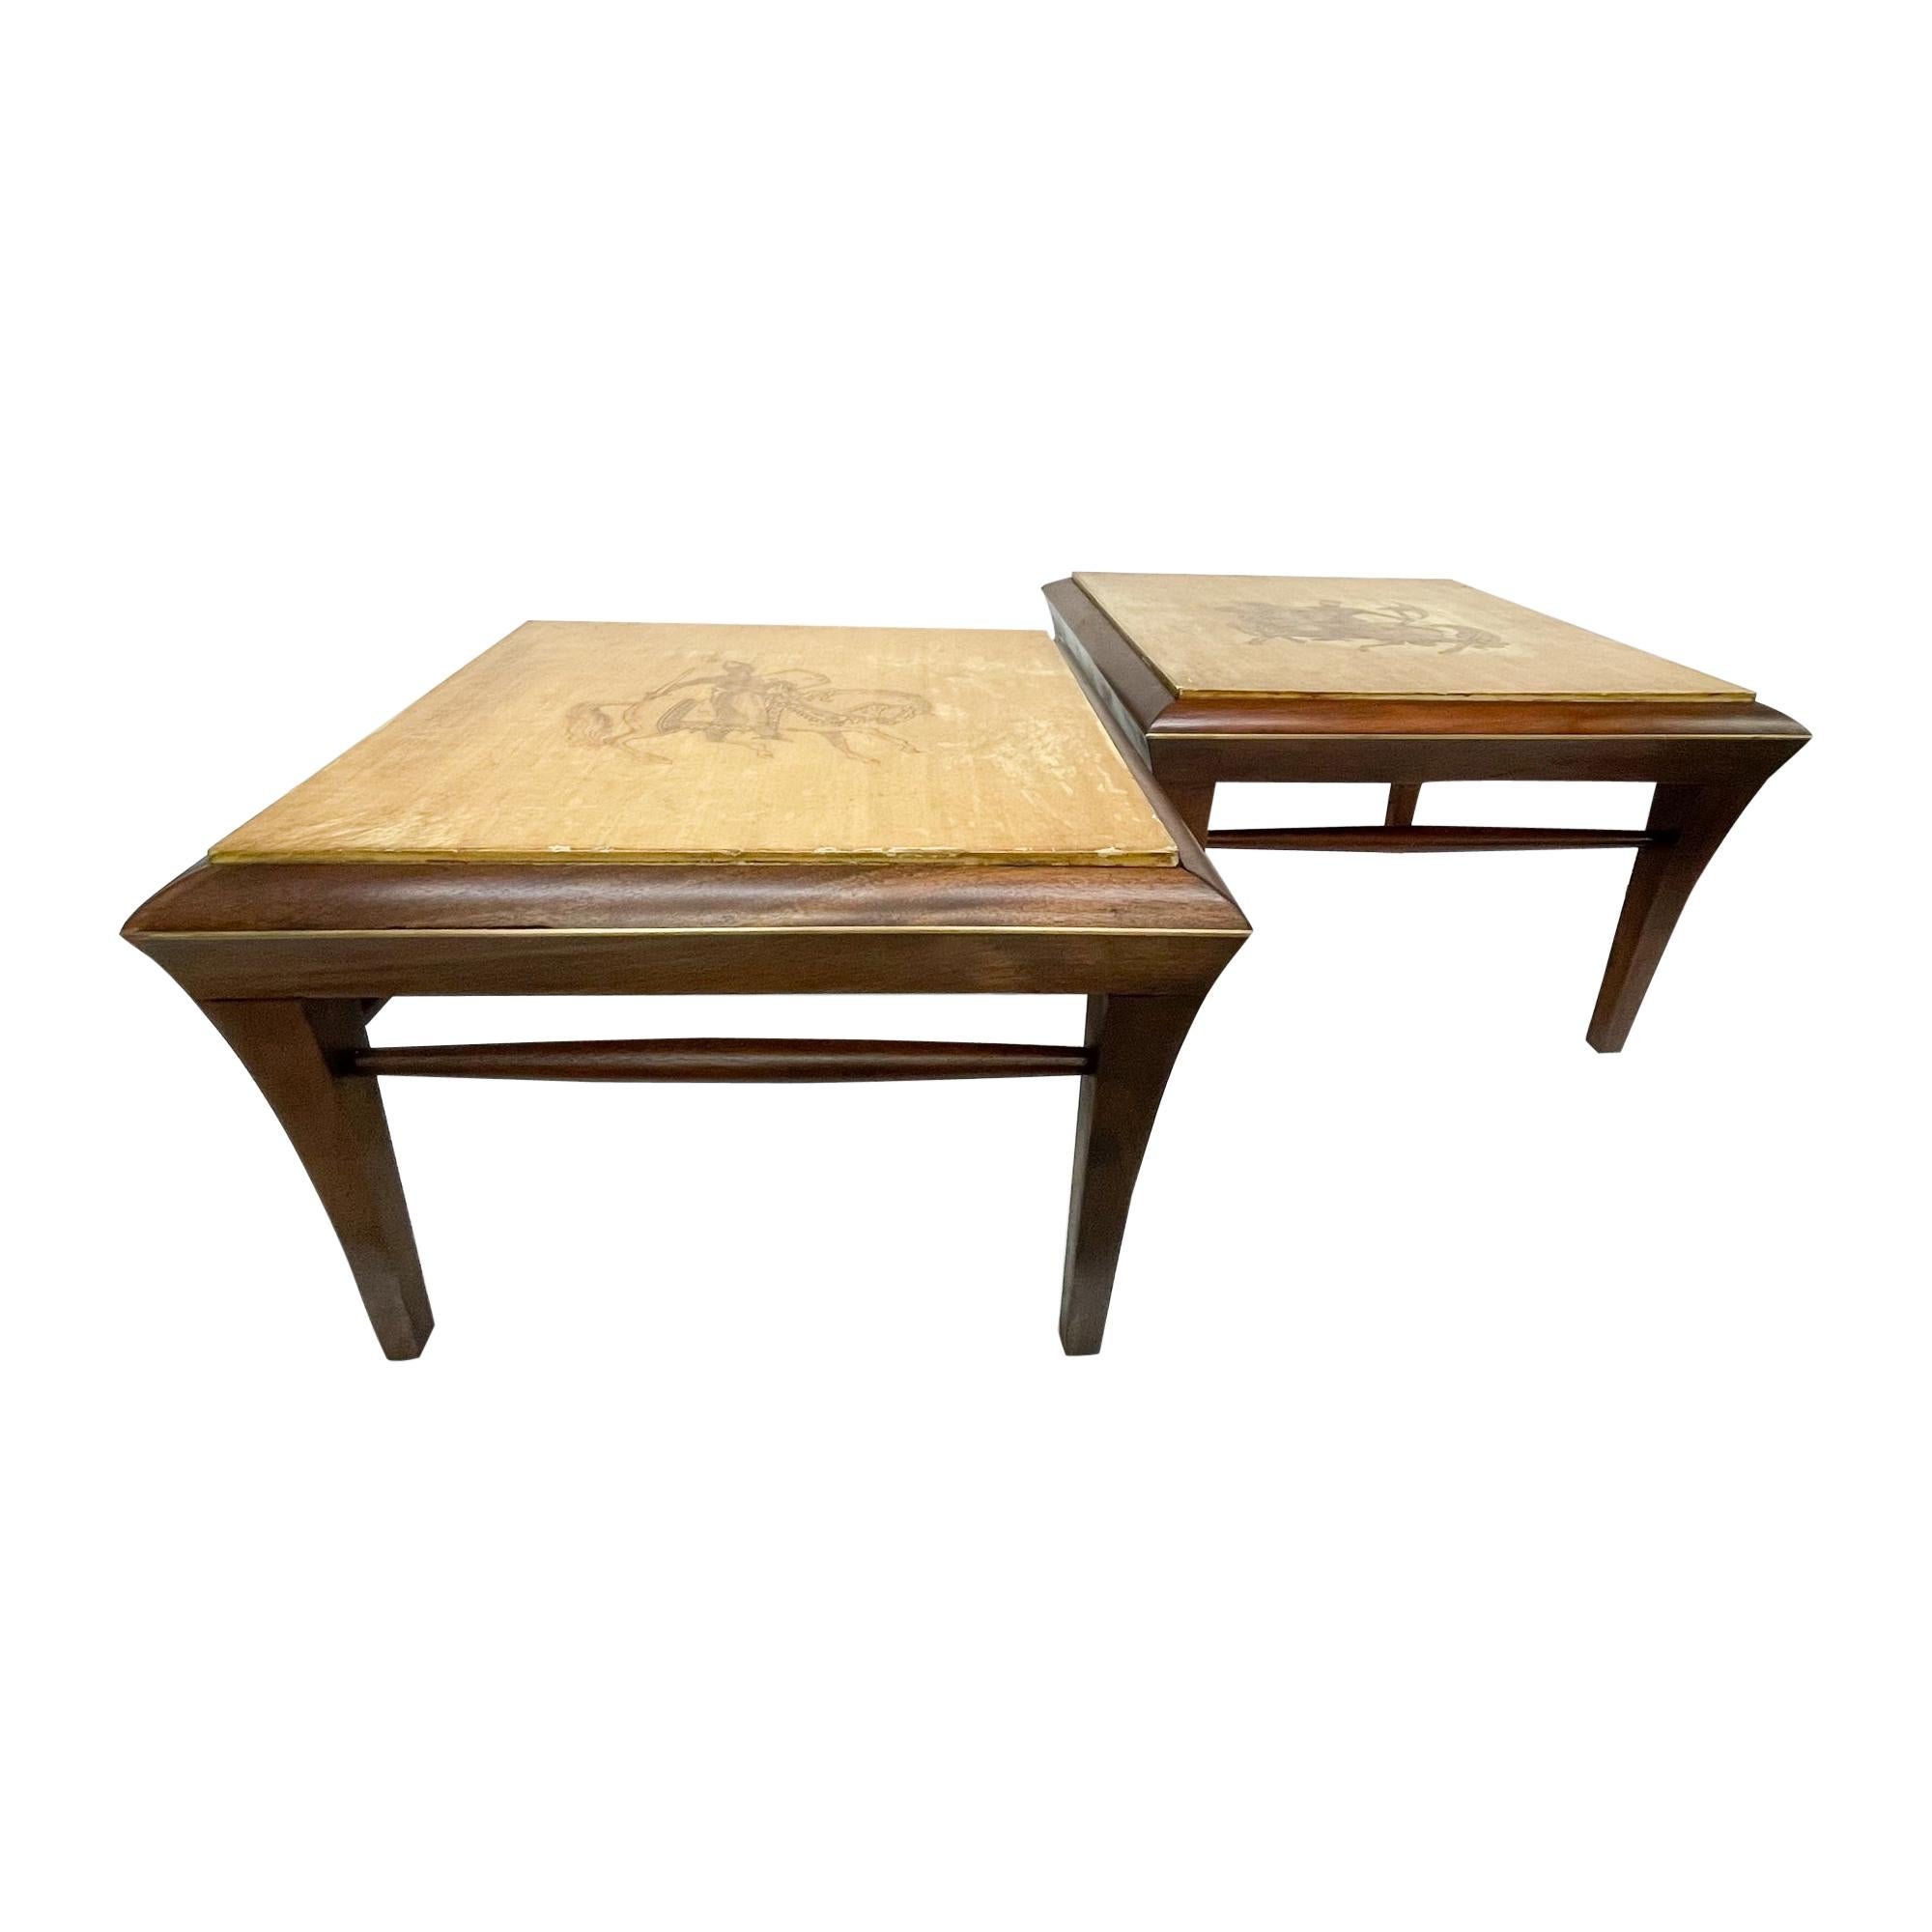 Neoclassical Mahogany & Goatskin Side Tables Hand Painted